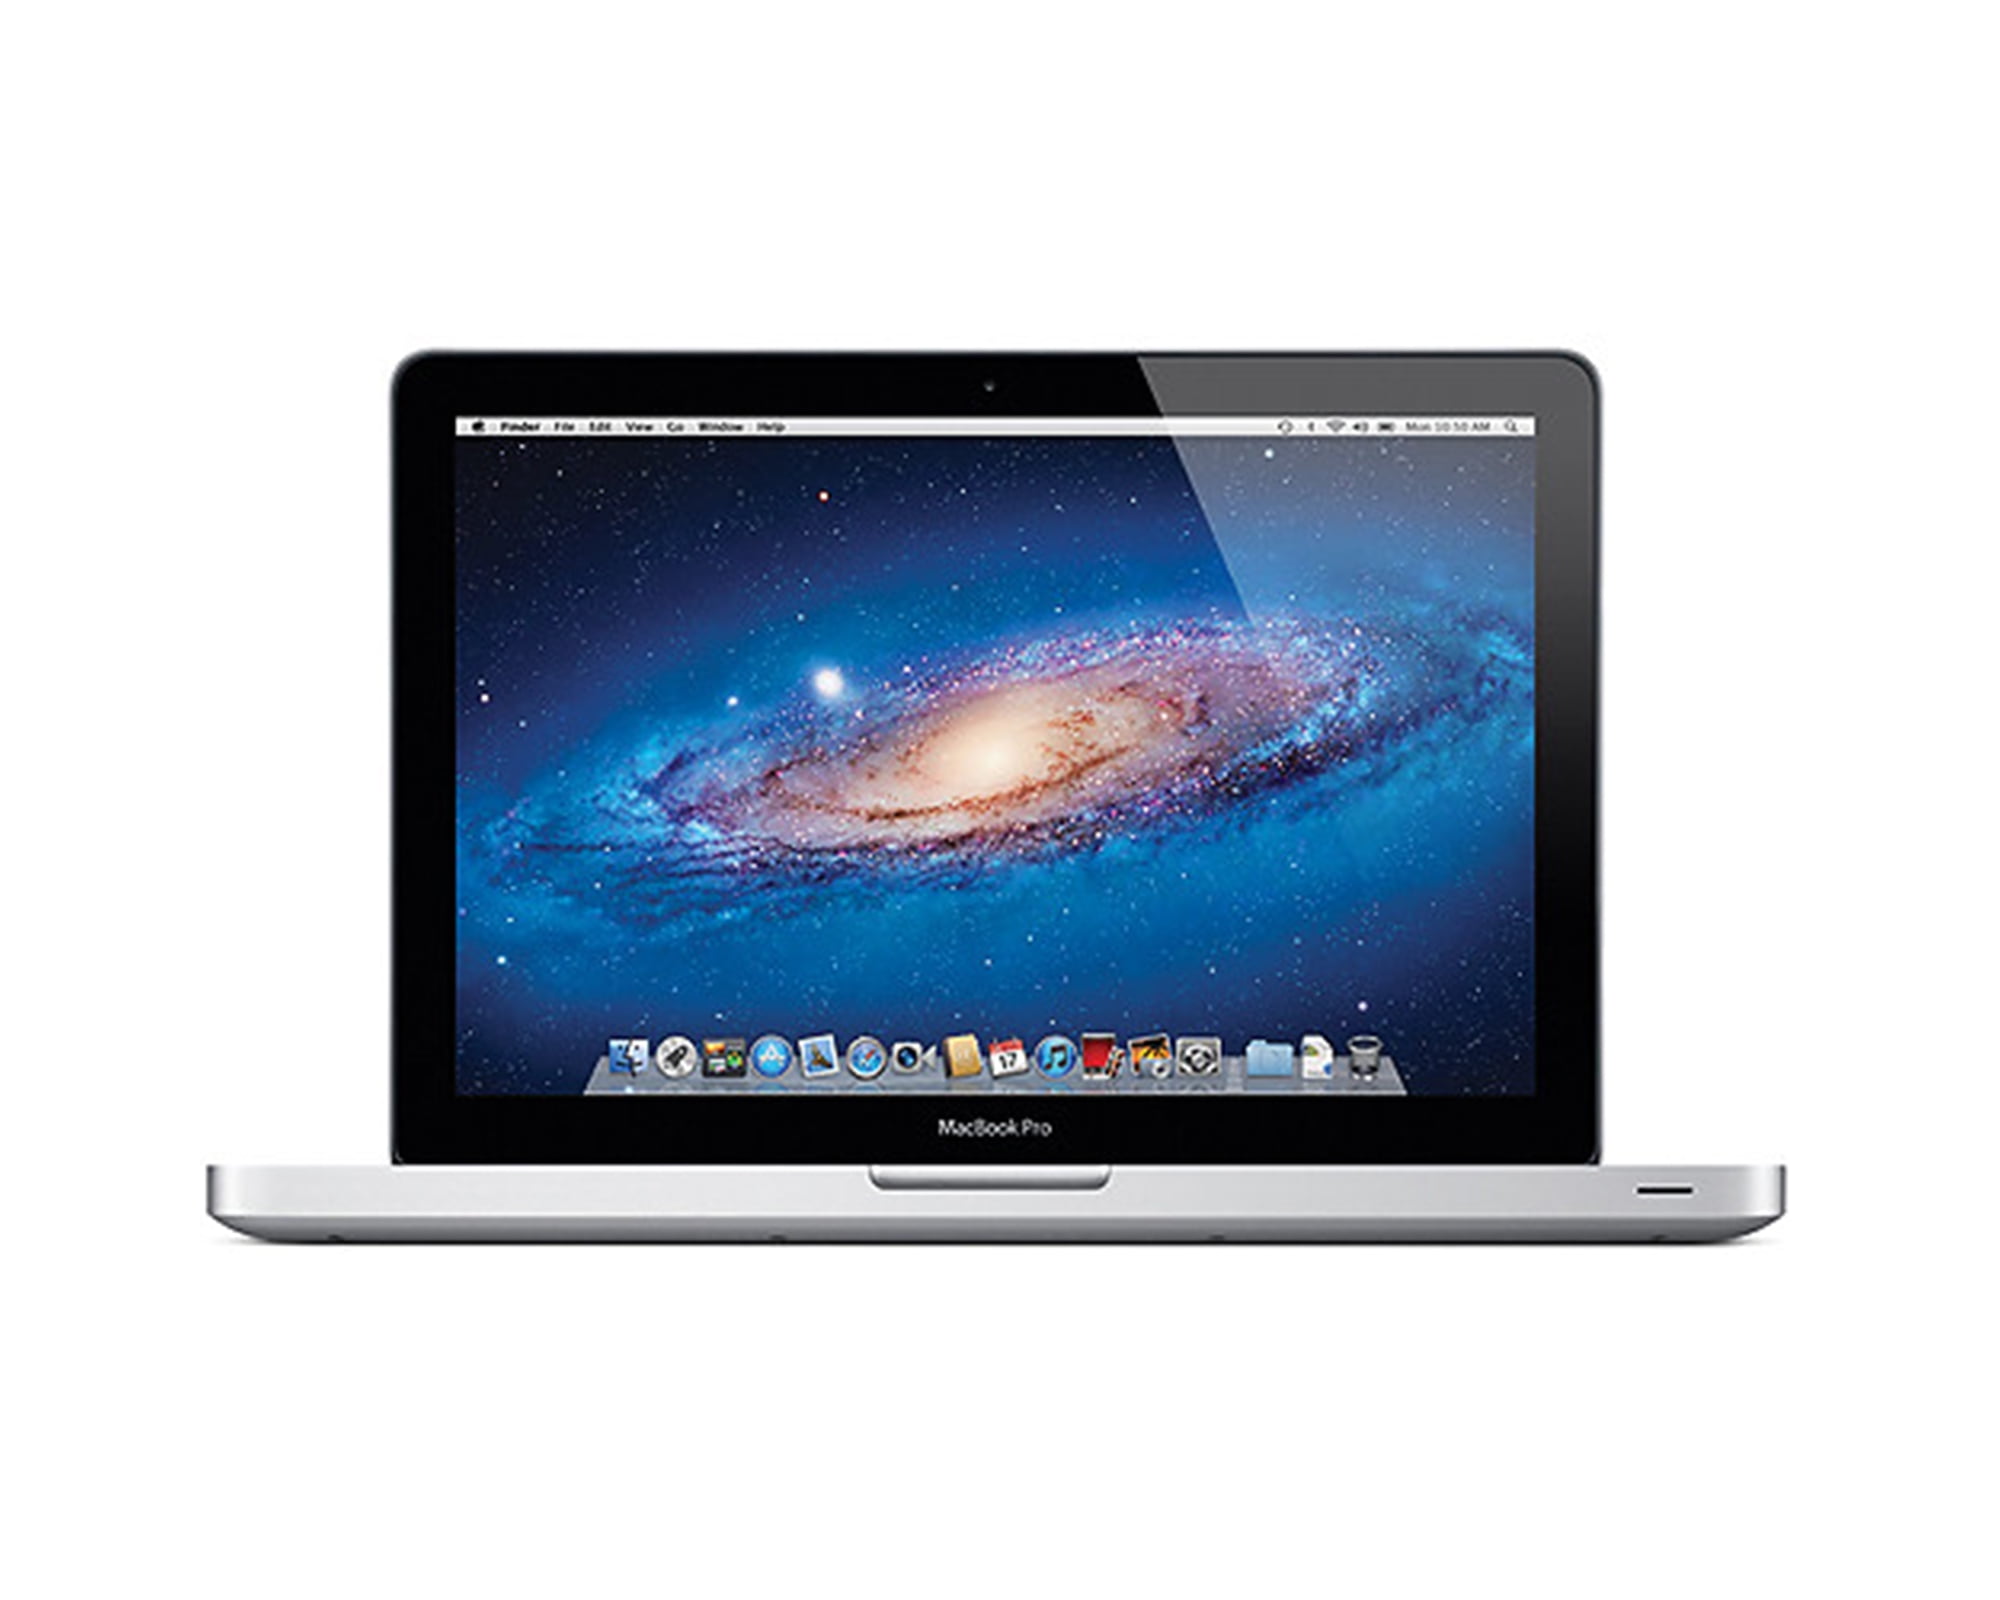 Apple MacBook Pro Laptop 13.3-inch Display, 8GB RAM, 500GB HDD, Intel Core  i7 2.9GHz, Mac OS, MD102LL/A (Non-Retail Packaging)